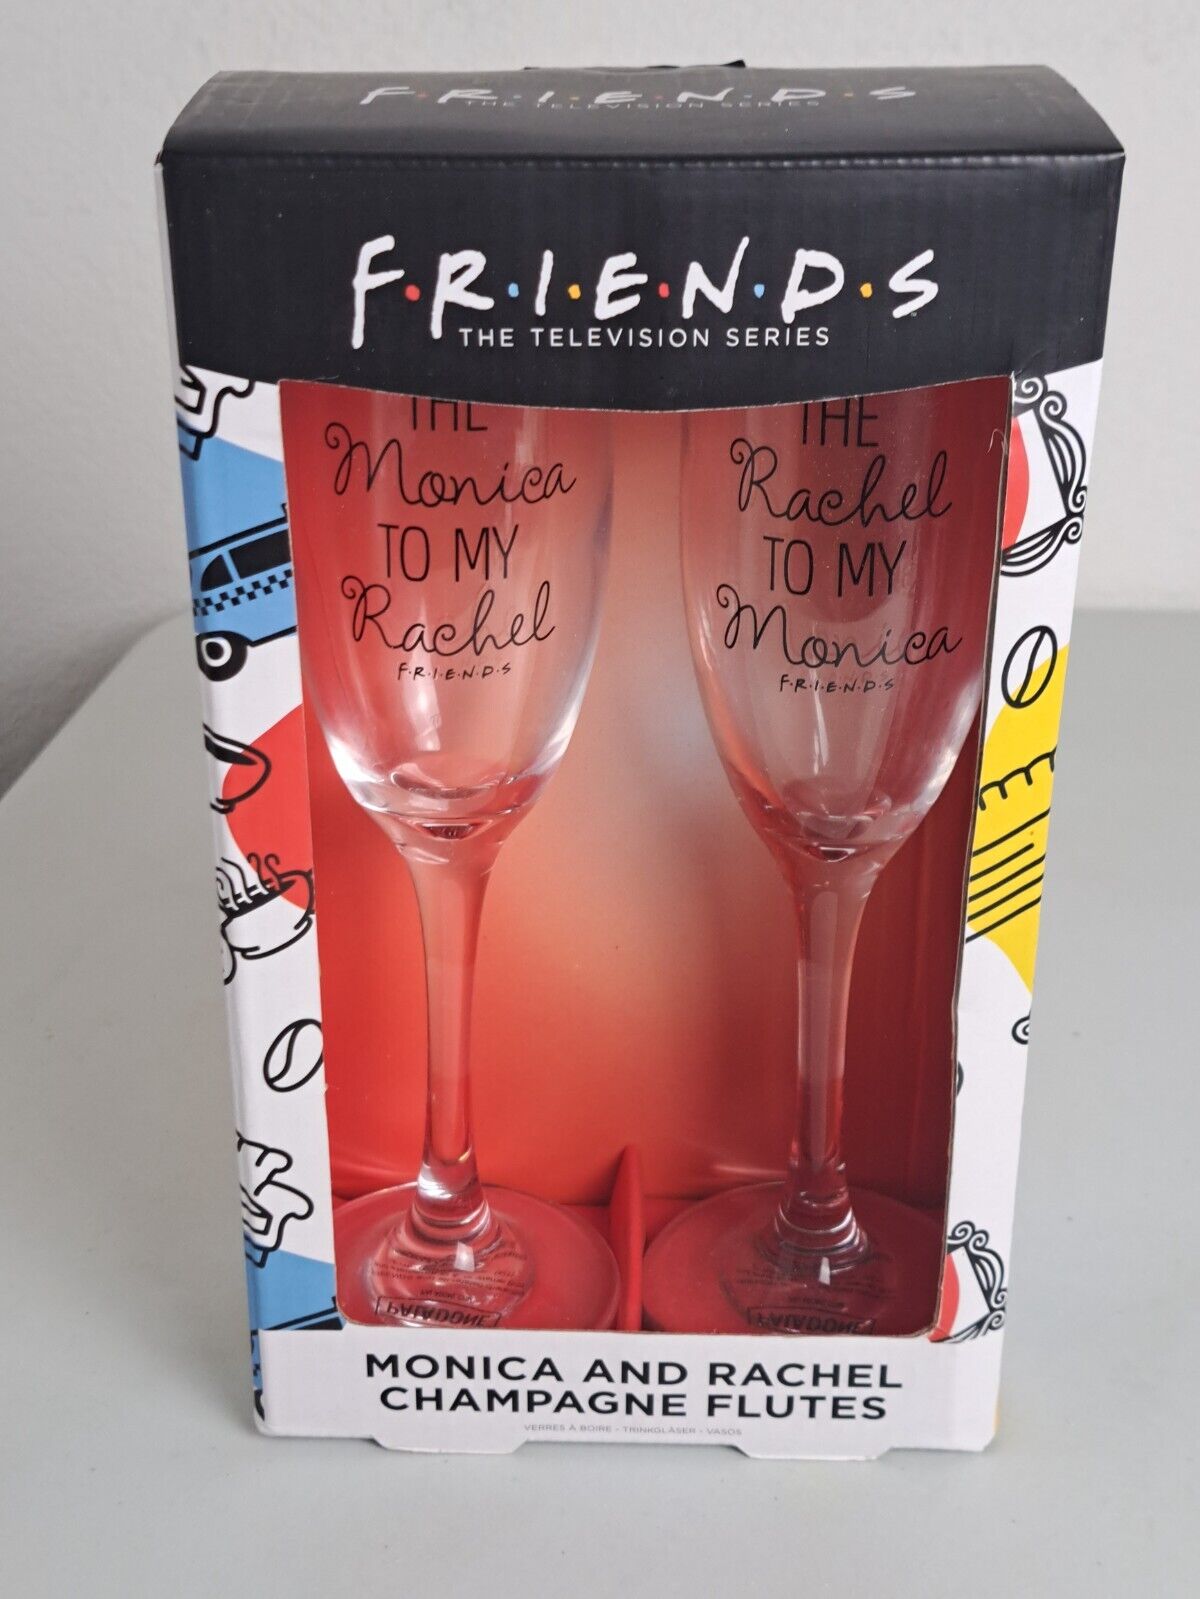 FRIENDS The TV Series MONICA AND RACHEL Champagne Flutes Glasses- NEW